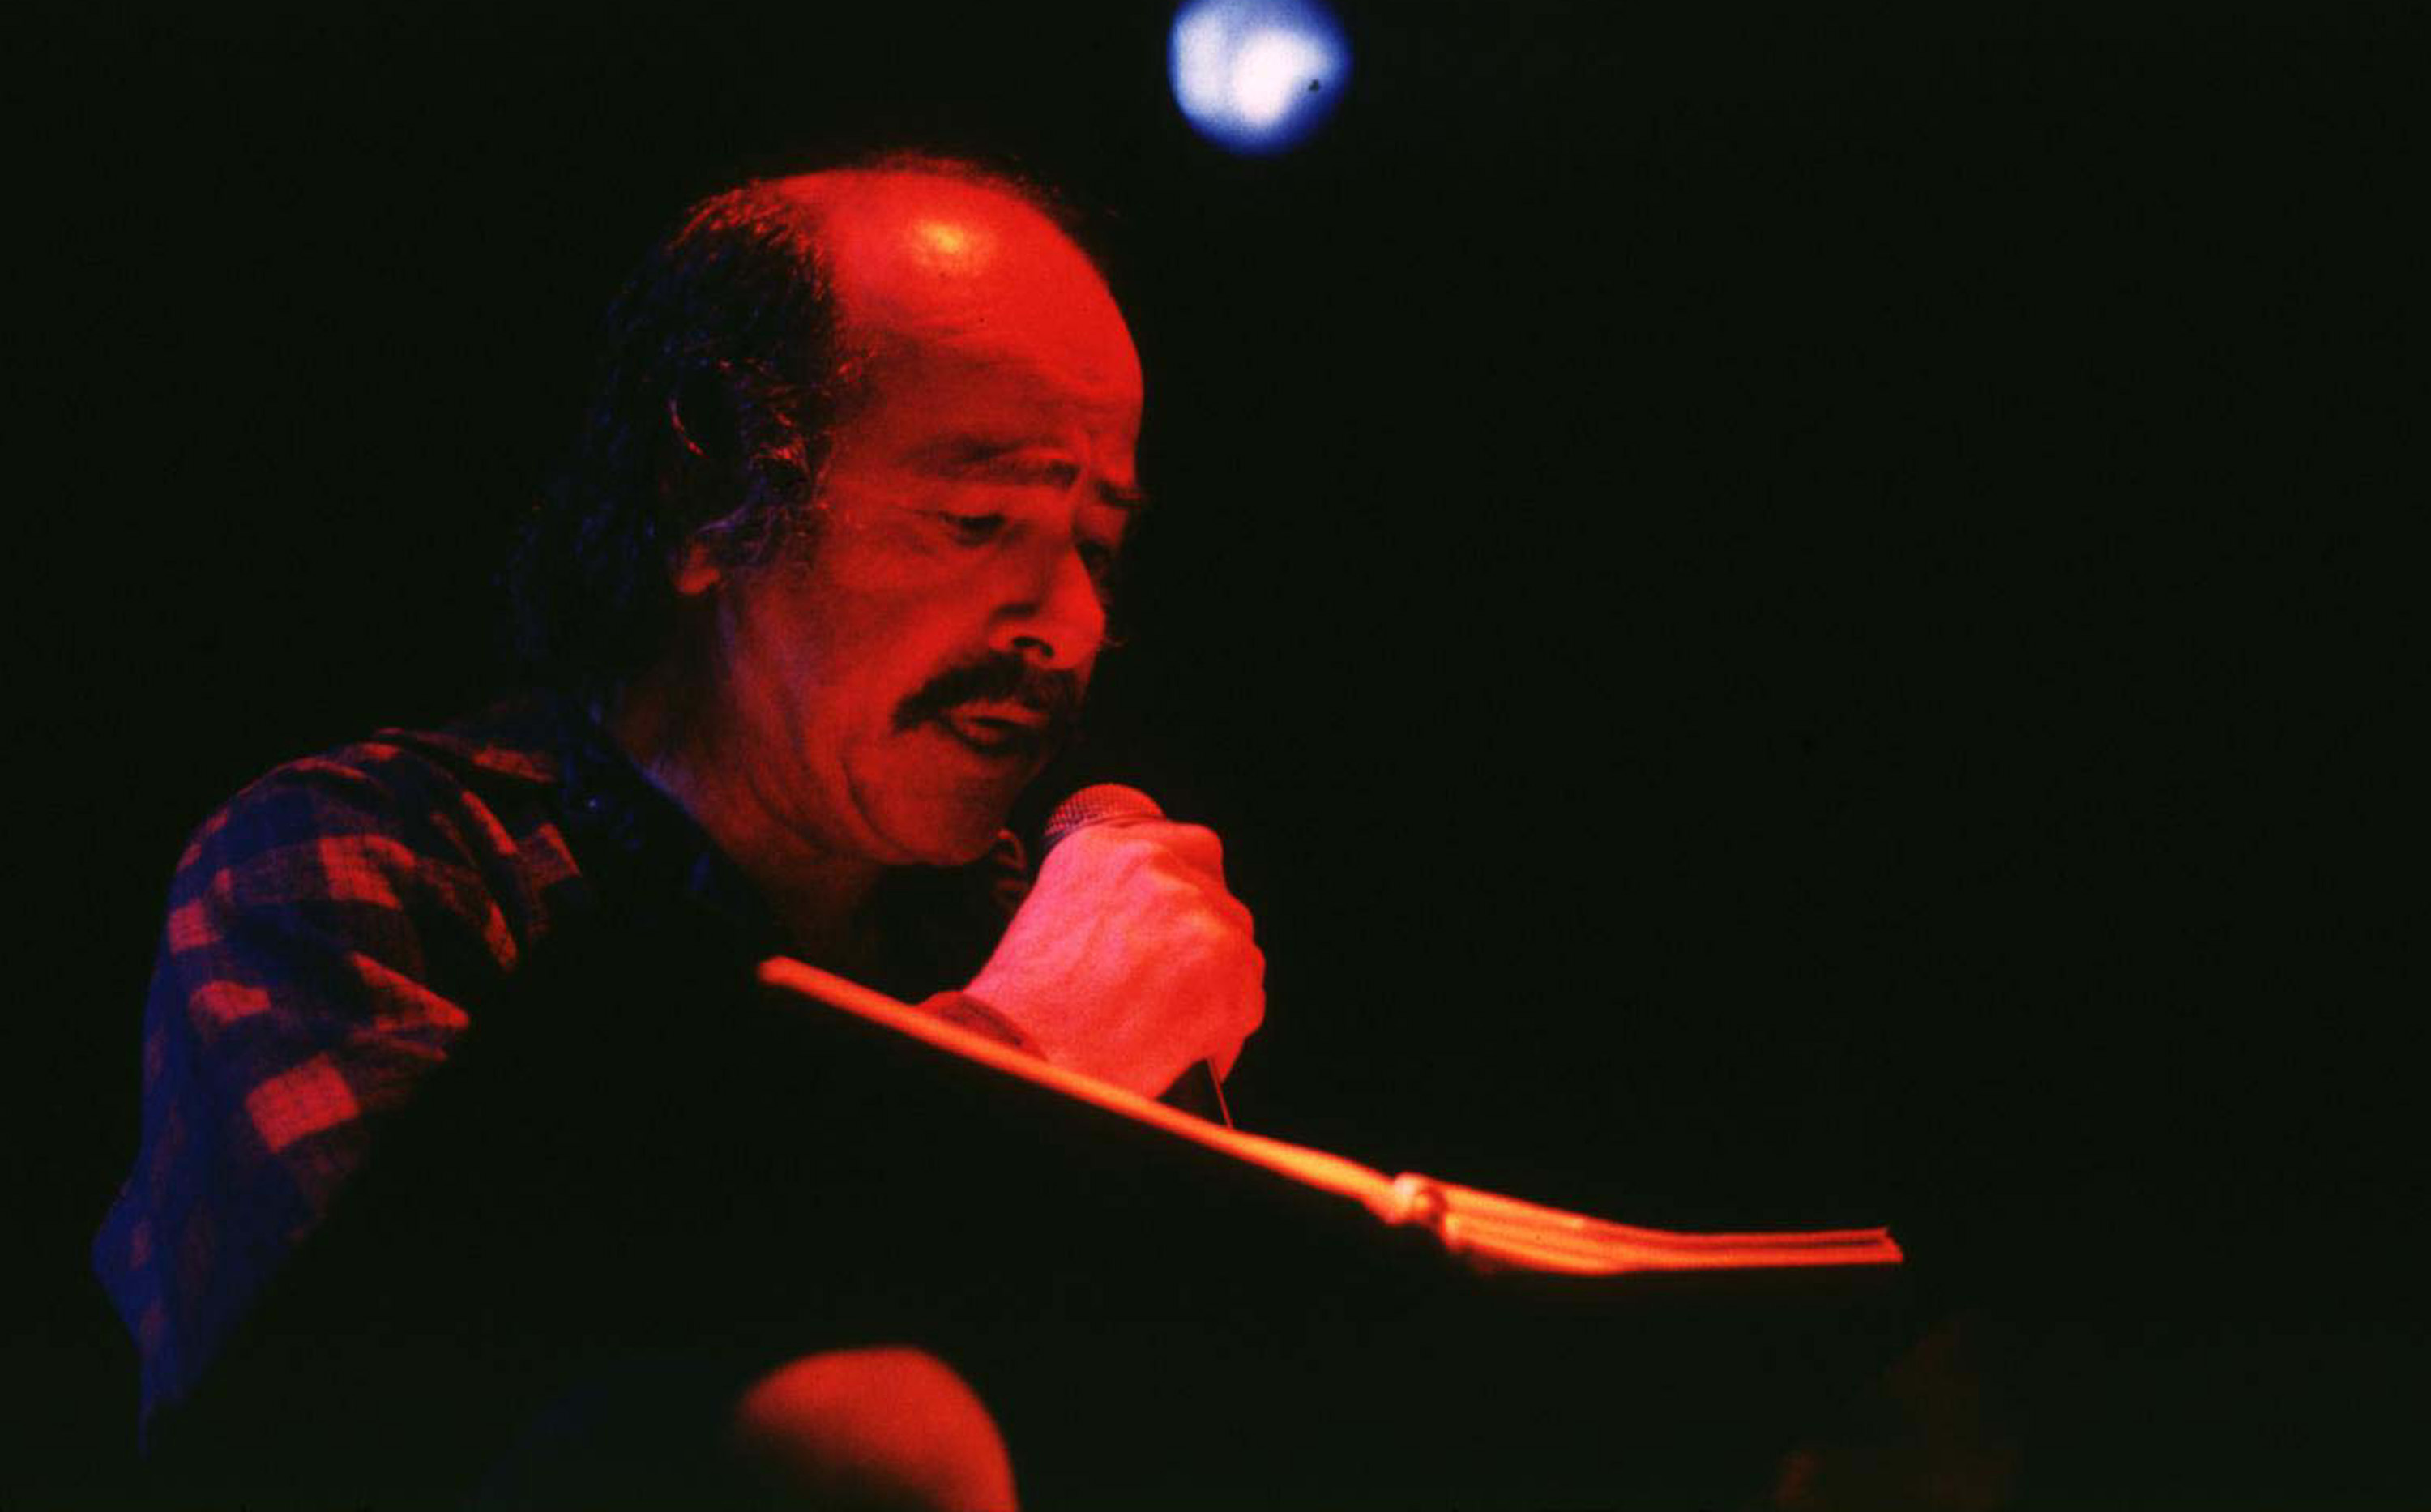 Robert Hunter of the Grateful Dead with microphone